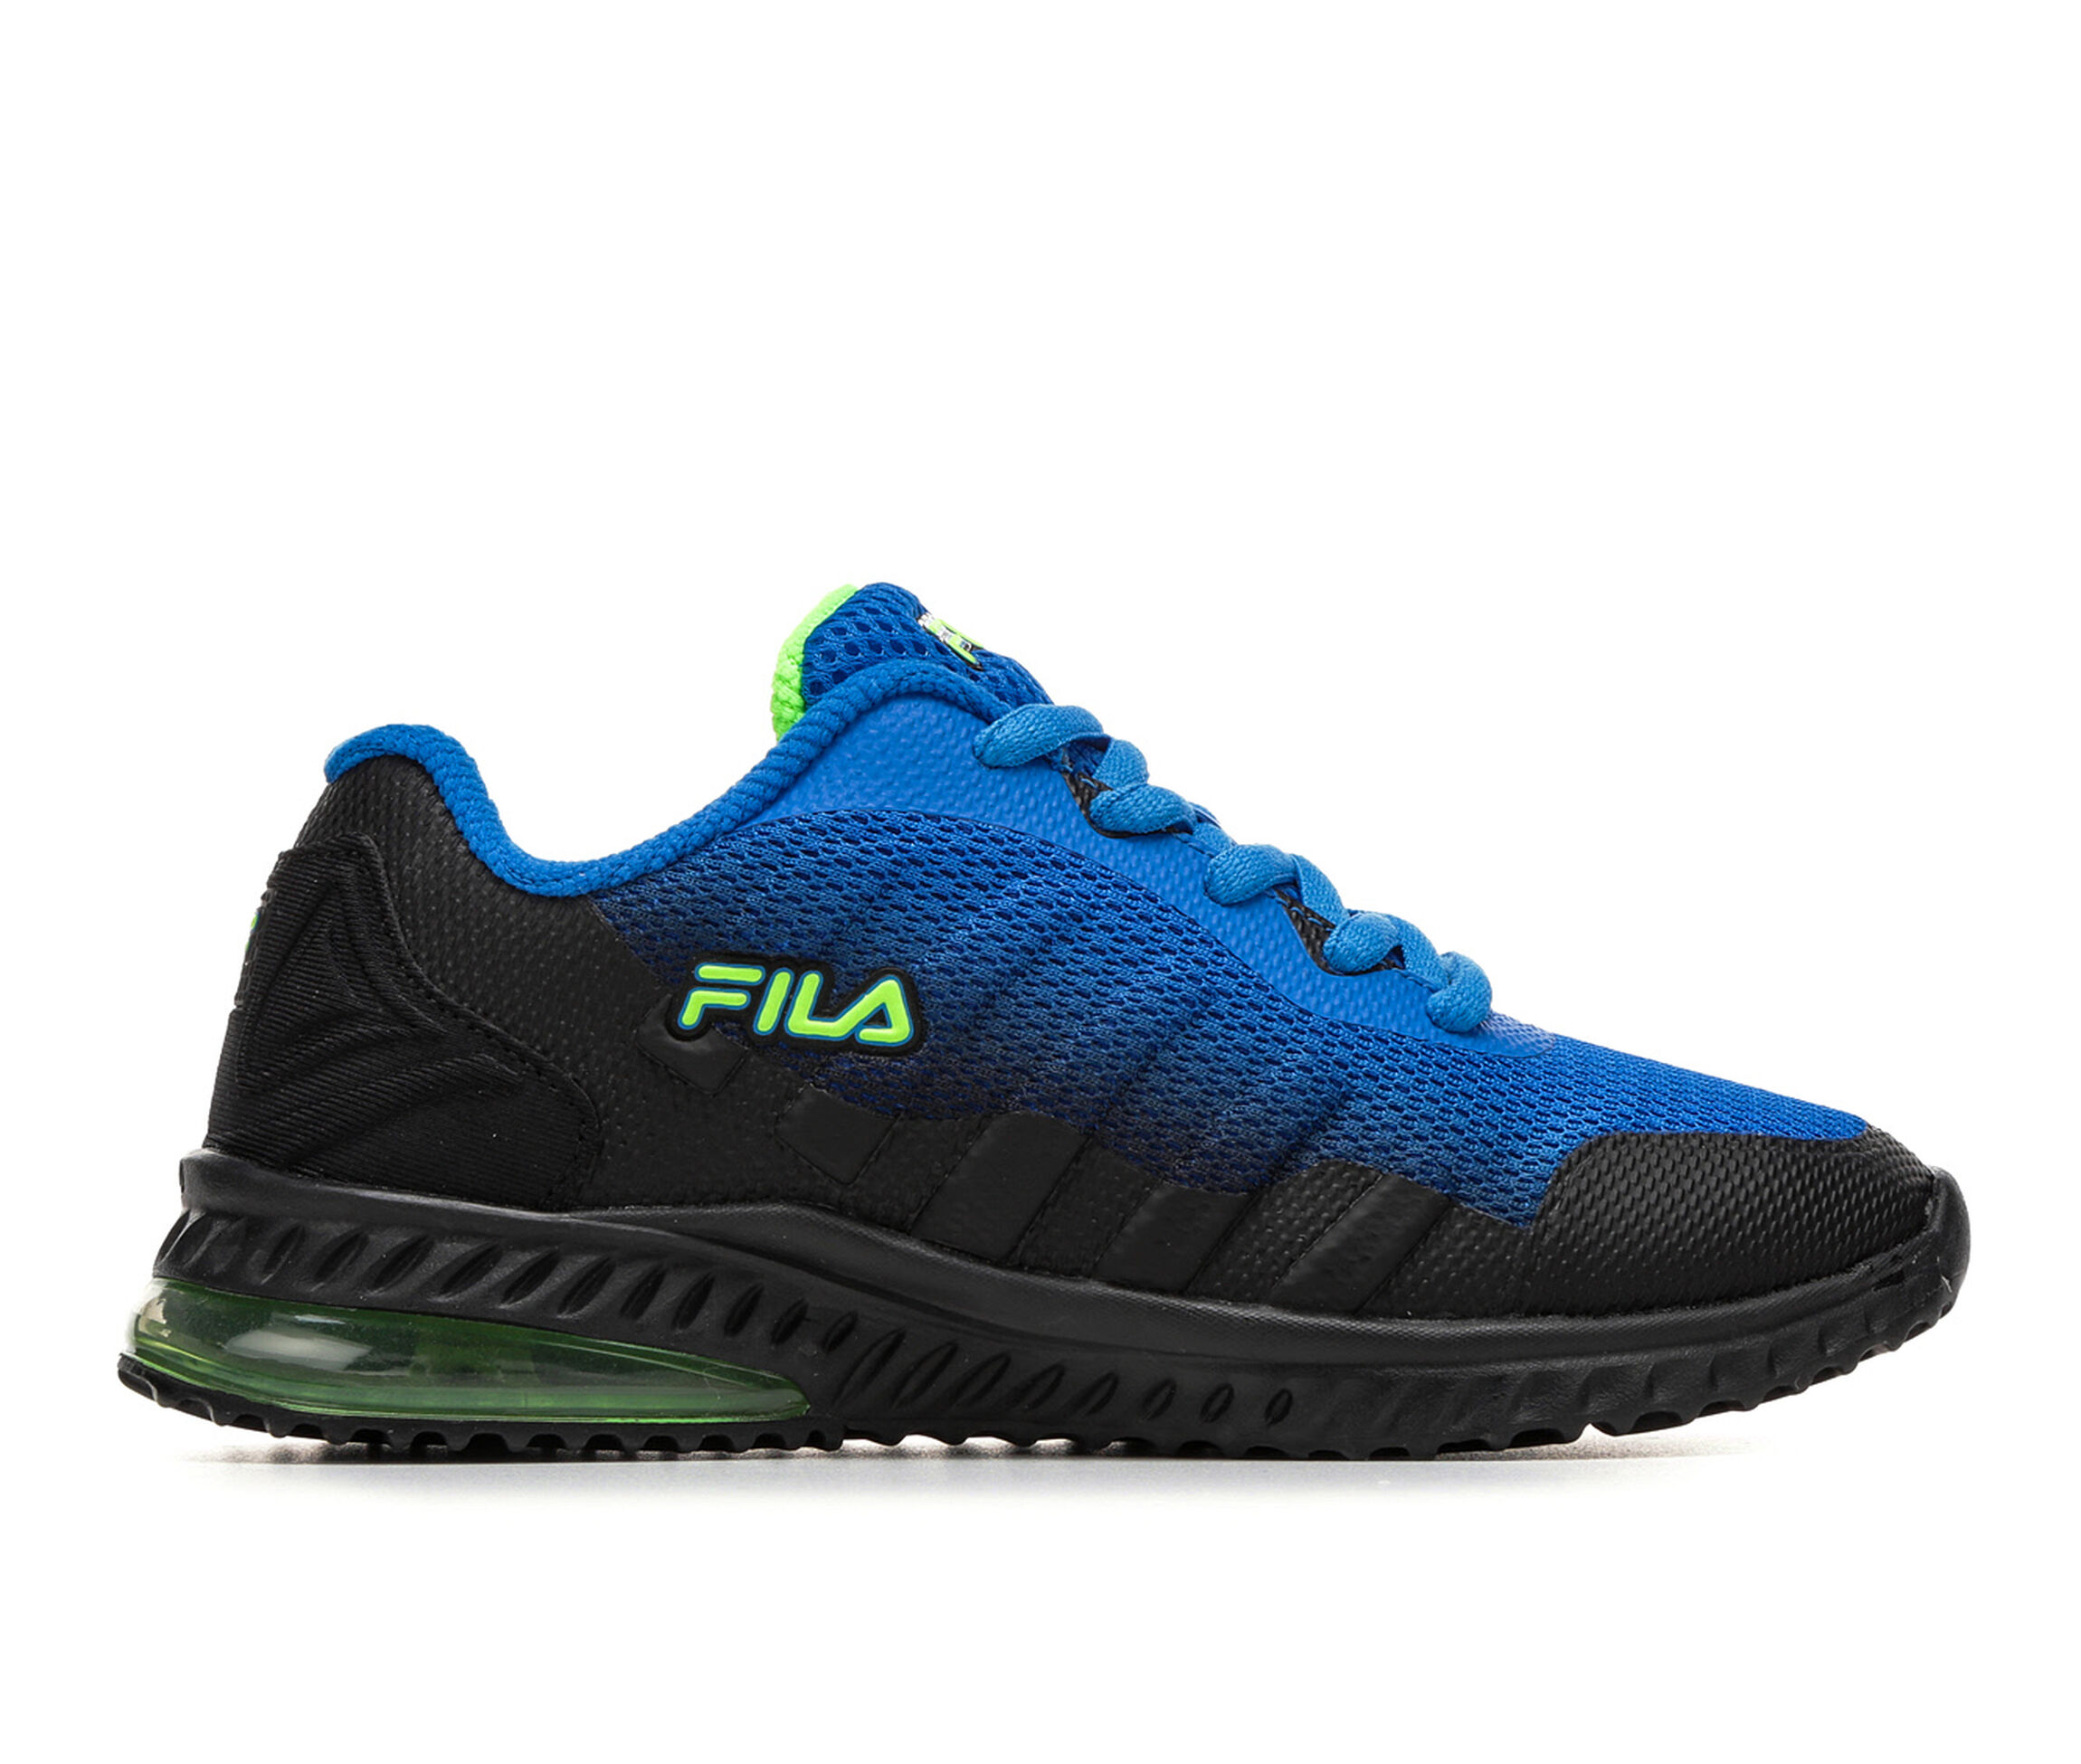 FILA Shoes, Sneakers, Kids' Gym Shoes & Accessories | Sho...